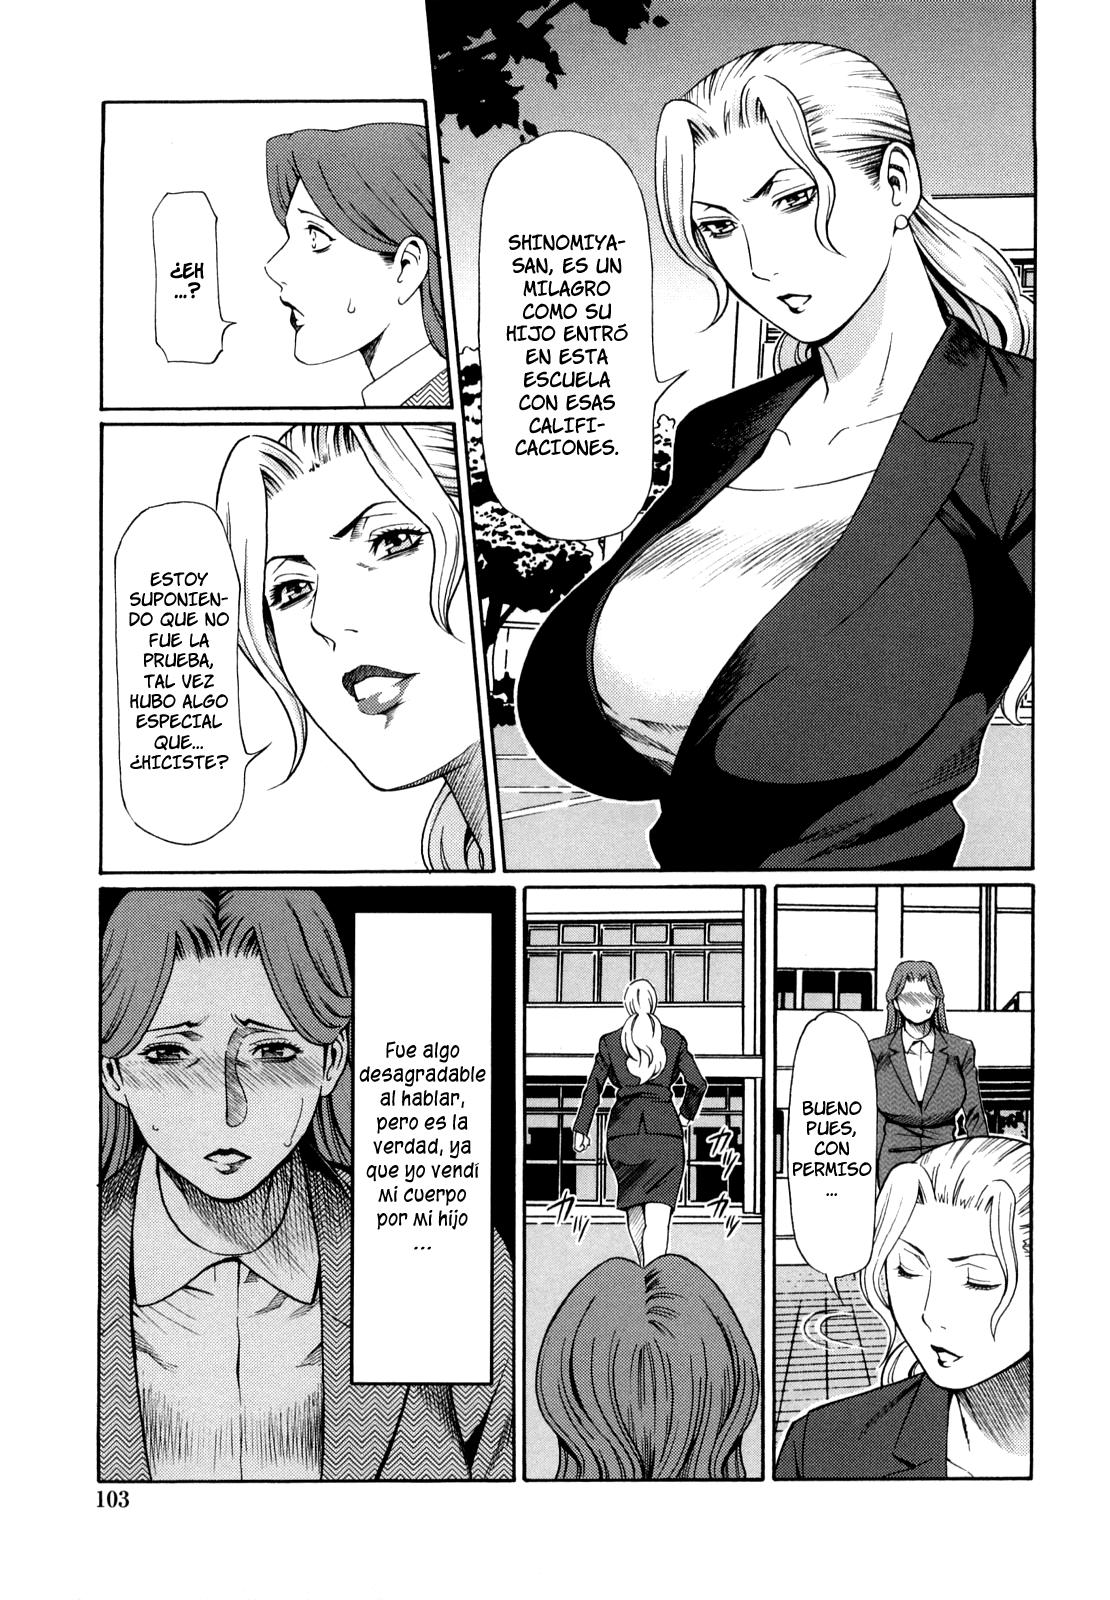 Immorality Love-Hole Completo (Sin Censura) Chapter-7 - 2